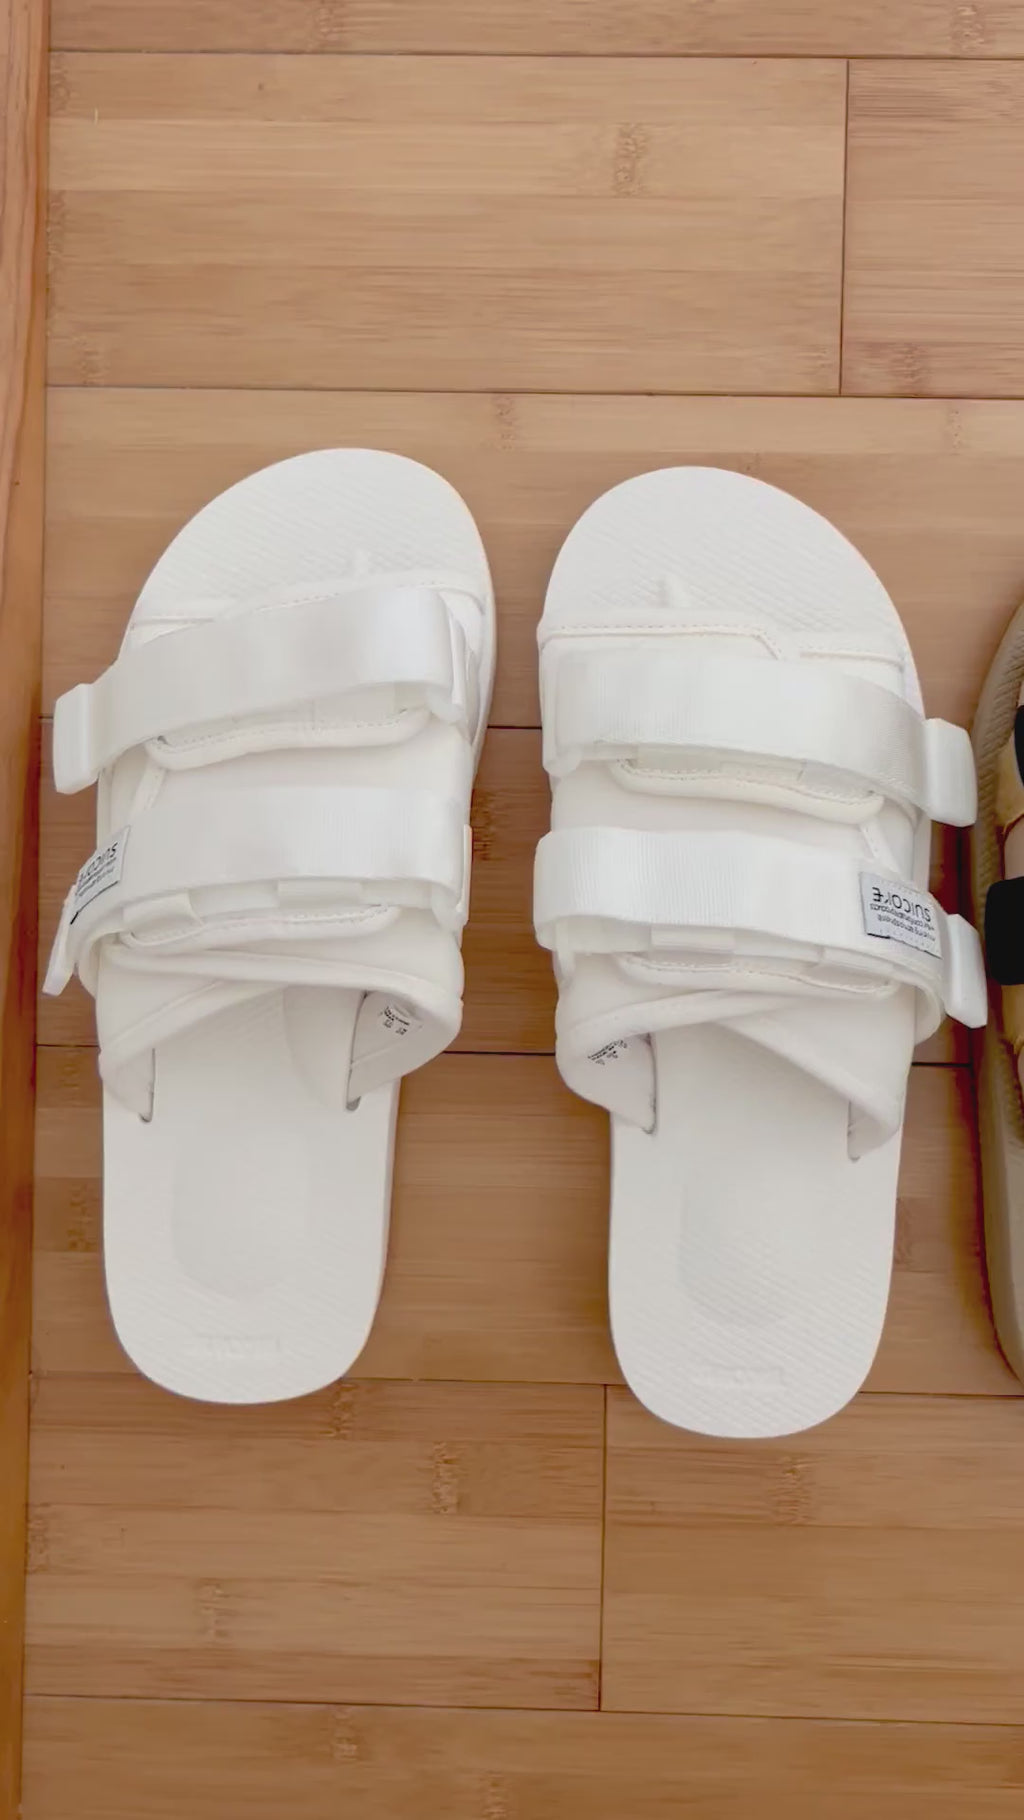 MOTO-Cab in White  Official SUICOKE US & CANADA Webstore